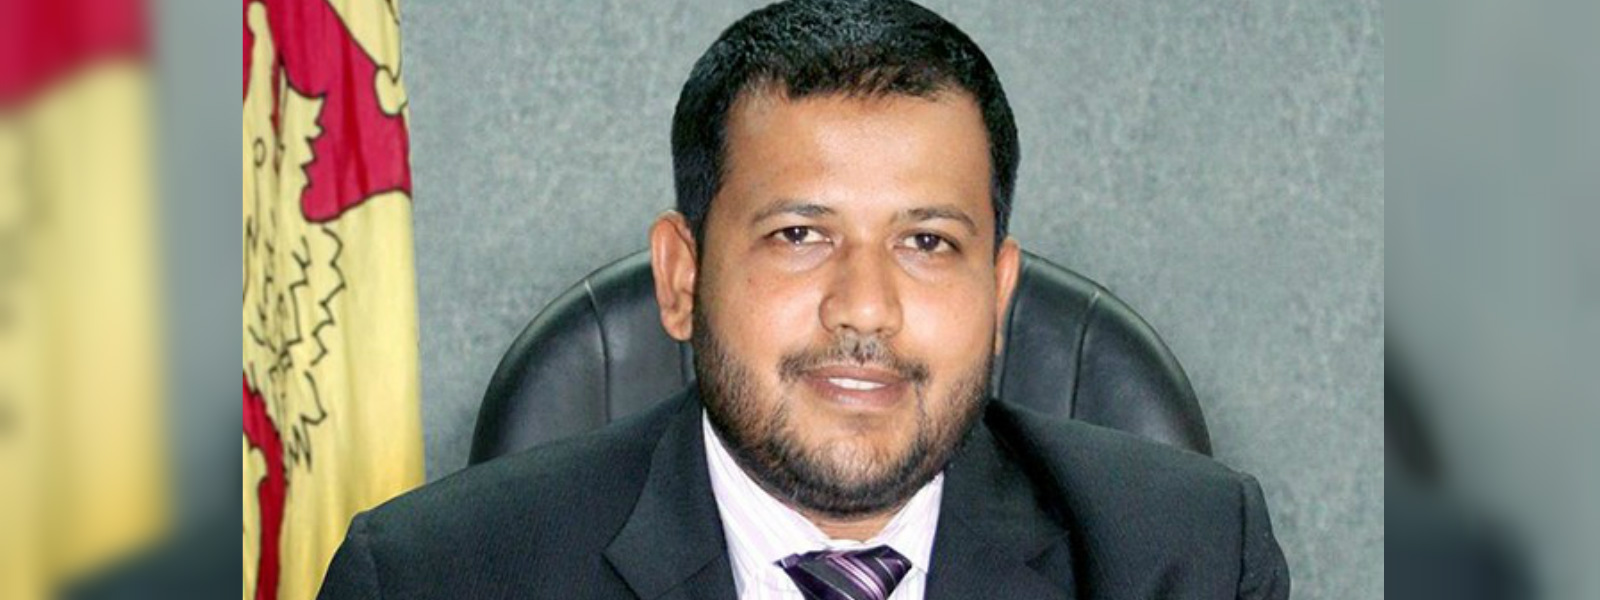 Rishad sends LoD for Rs.1 Bn to Wimal Weerawansa